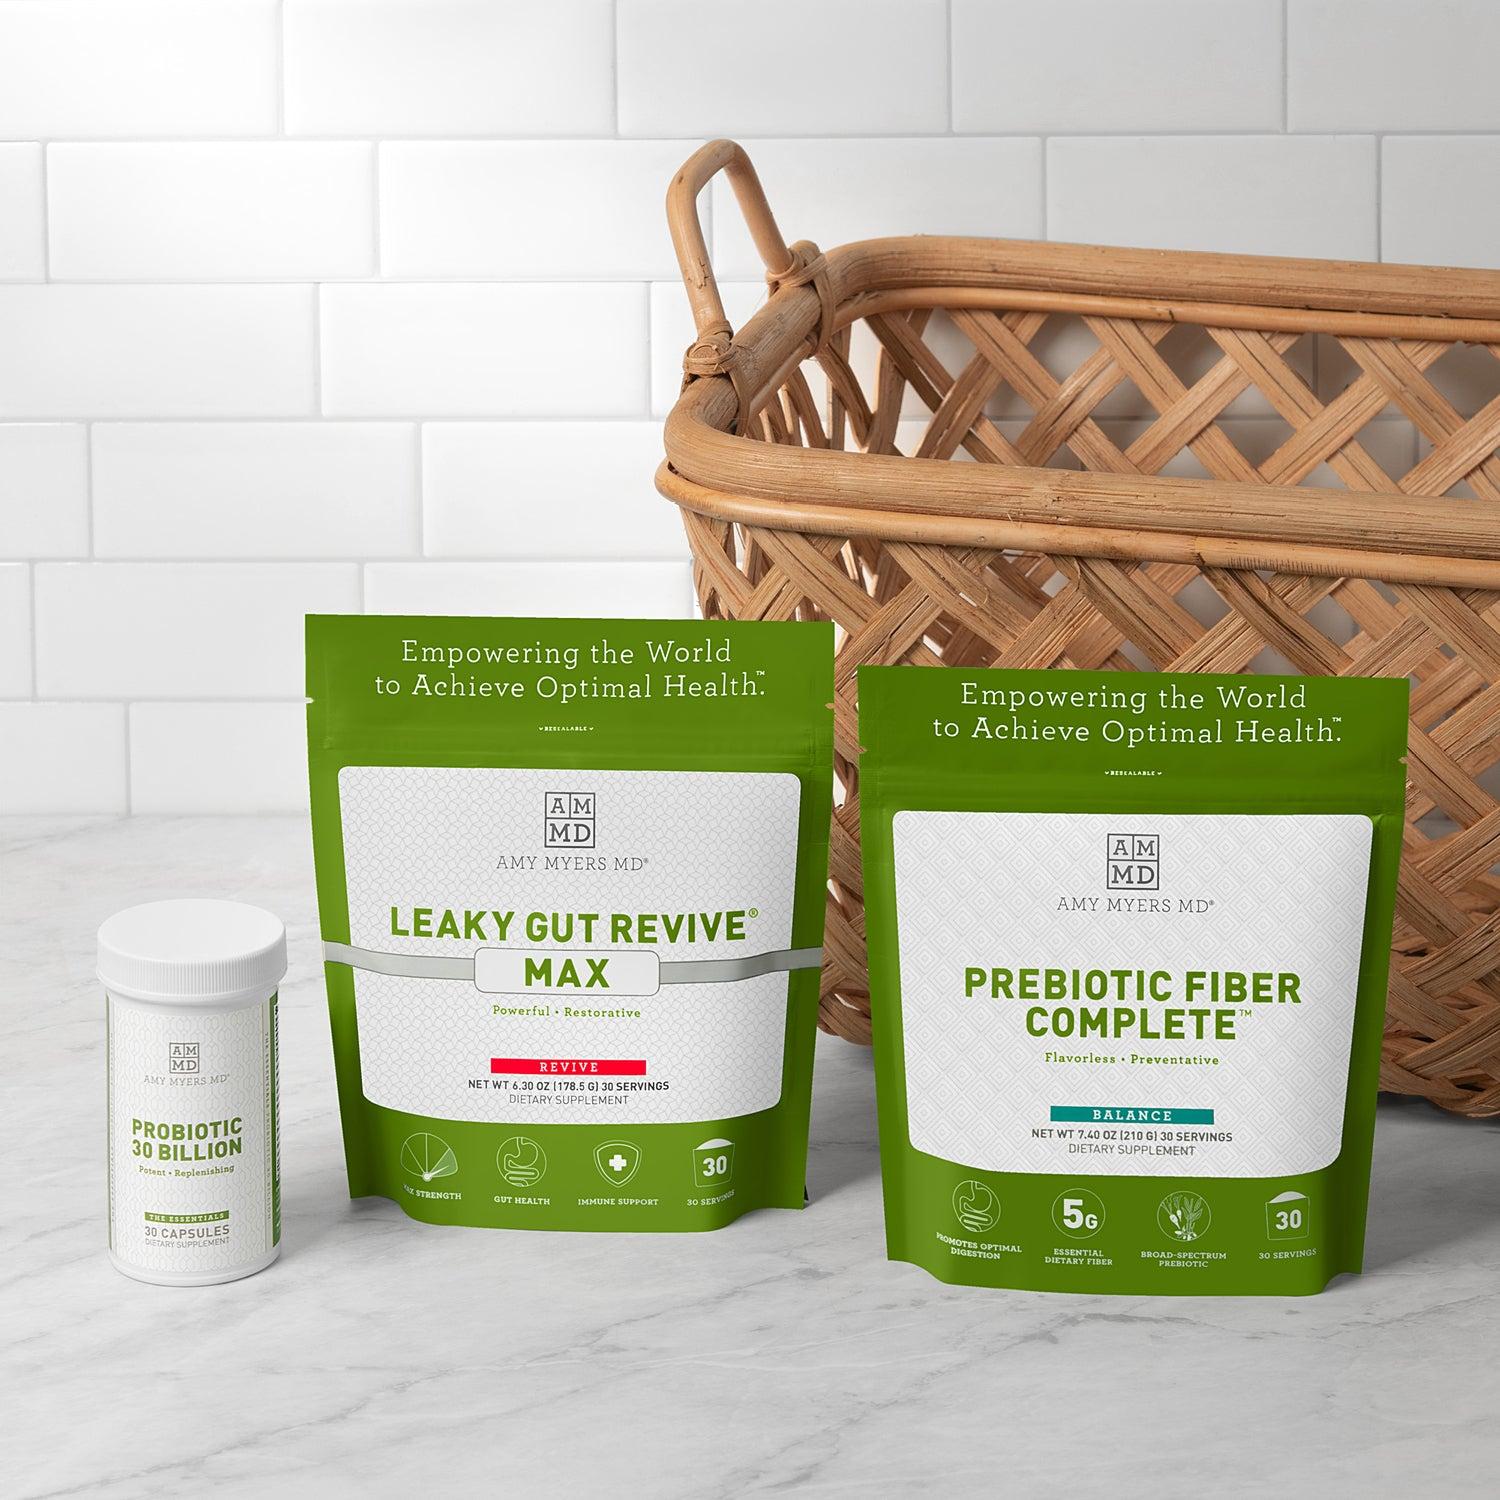 Picture of the Everyday Gut Health Kit on a grey marble counter top in front of a house plant and white wall. The products featured in the kit are presented with the AMMD Prebiotic Fiber Complete next to AMMD Leaky Gut Revive Max, both featured in vibrant Green resealable bags, positioned in back of the white AMMD Probiotic 30 Billion , 30 capsule pill bottle.